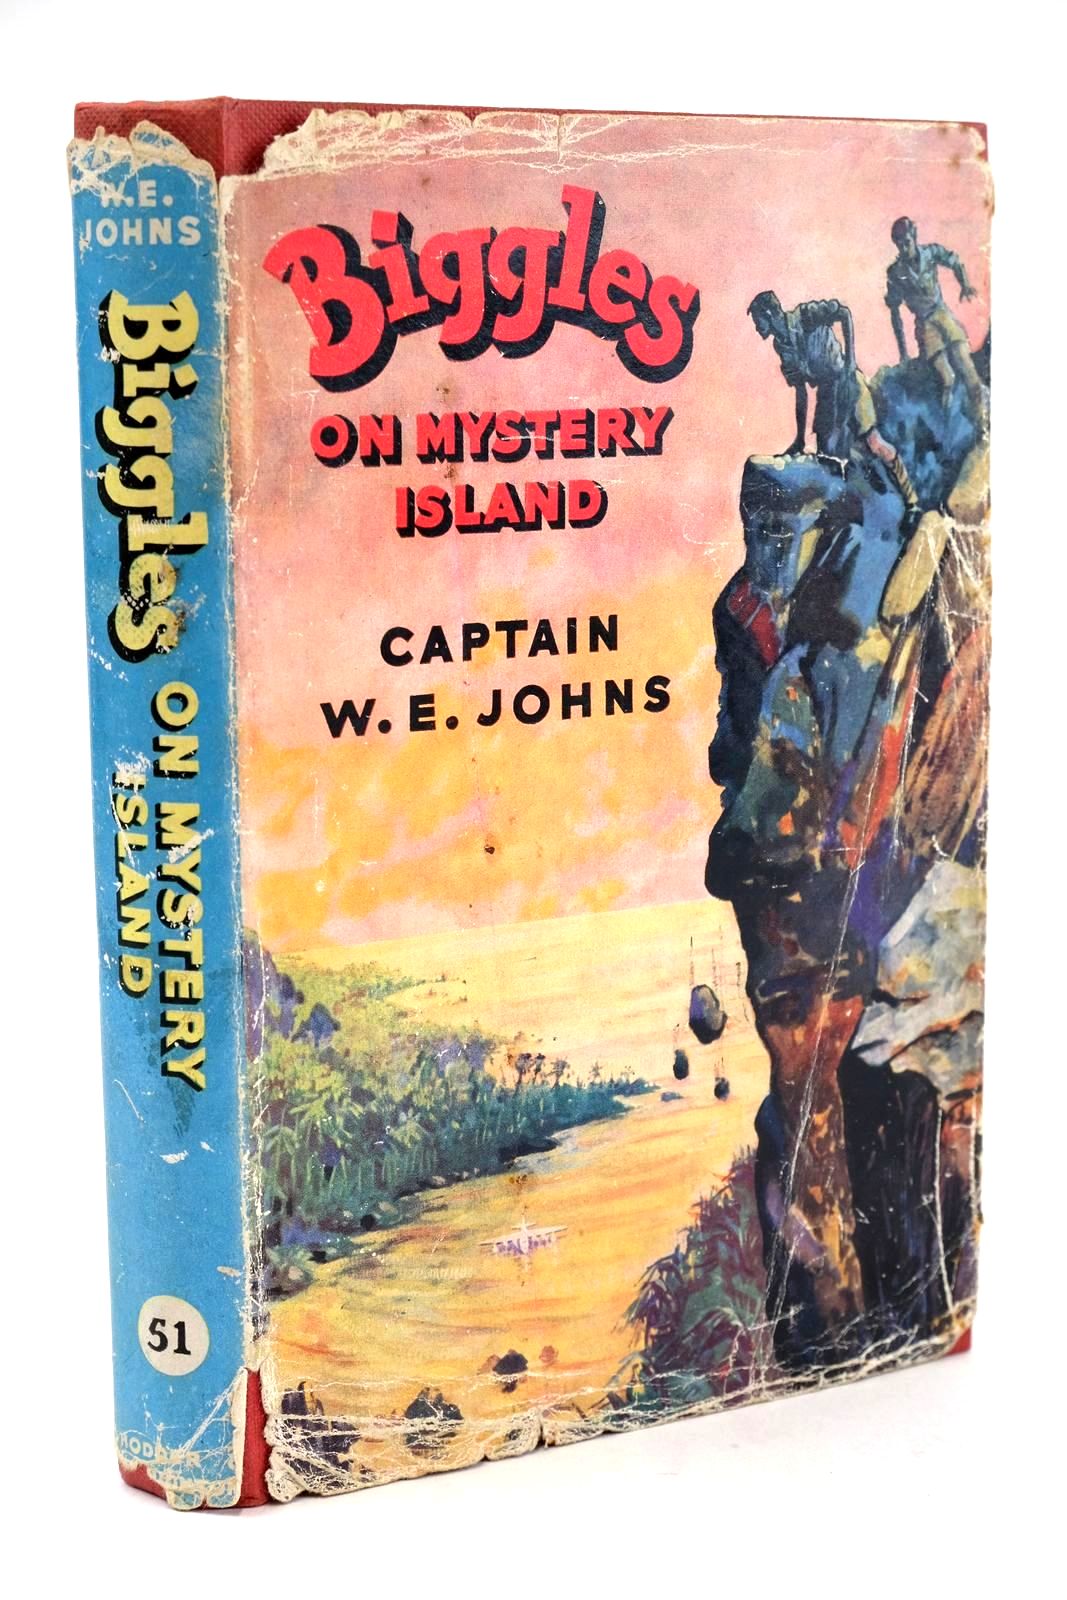 Photo of BIGGLES ON MYSTERY ISLAND written by Johns, W.E. illustrated by Stead,  published by Hodder &amp; Stoughton (STOCK CODE: 1324357)  for sale by Stella & Rose's Books